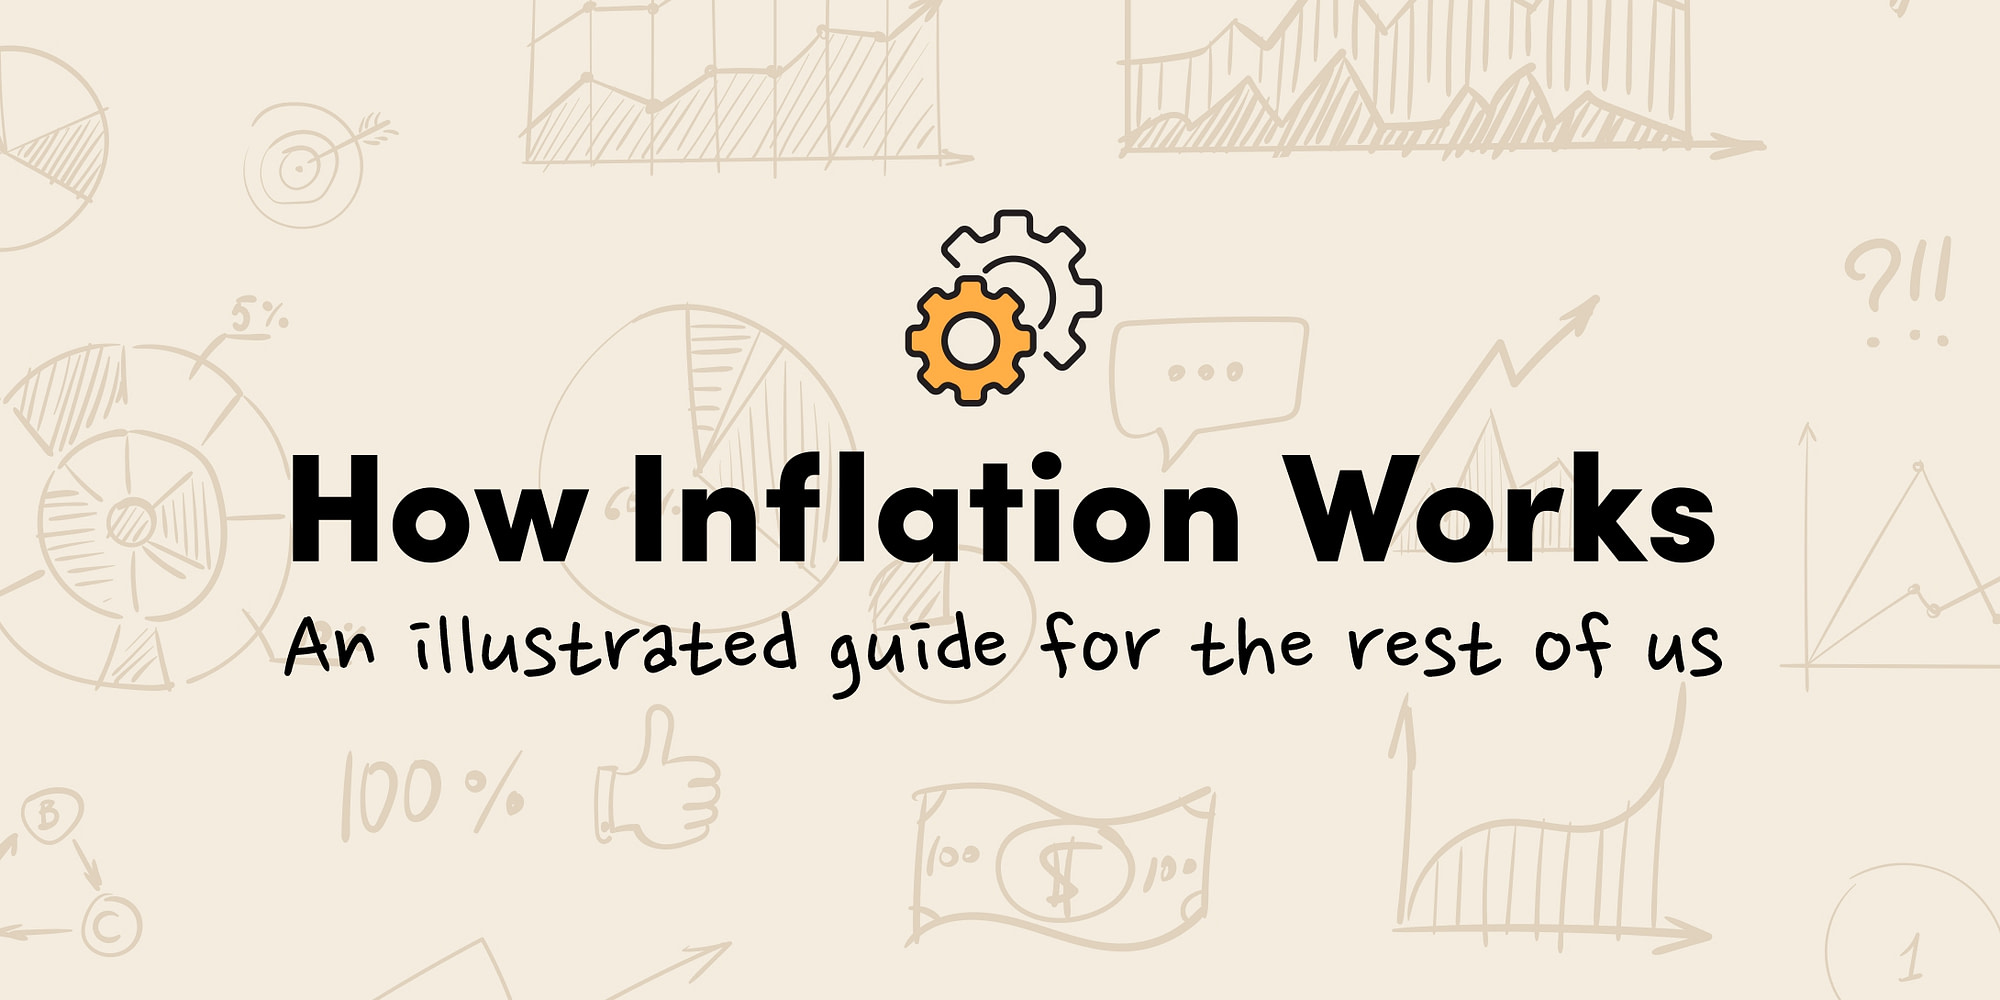 How Does Inflation Work: An Illustrated Guide for the Rest of Us